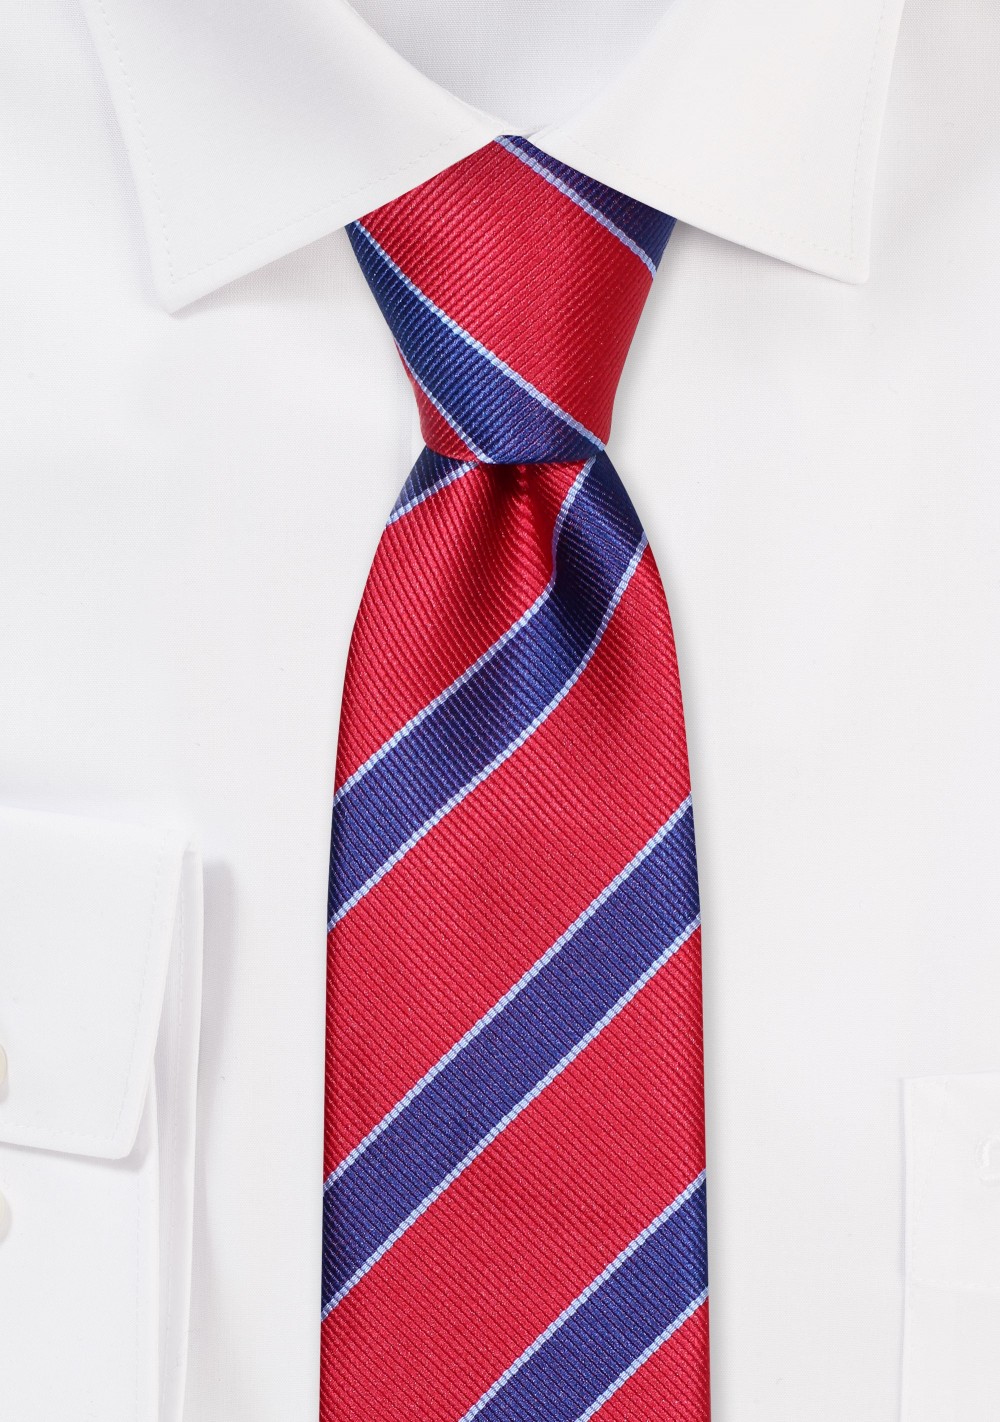 Repp Skinny Tie in Cherry, Navy, and Light Blue